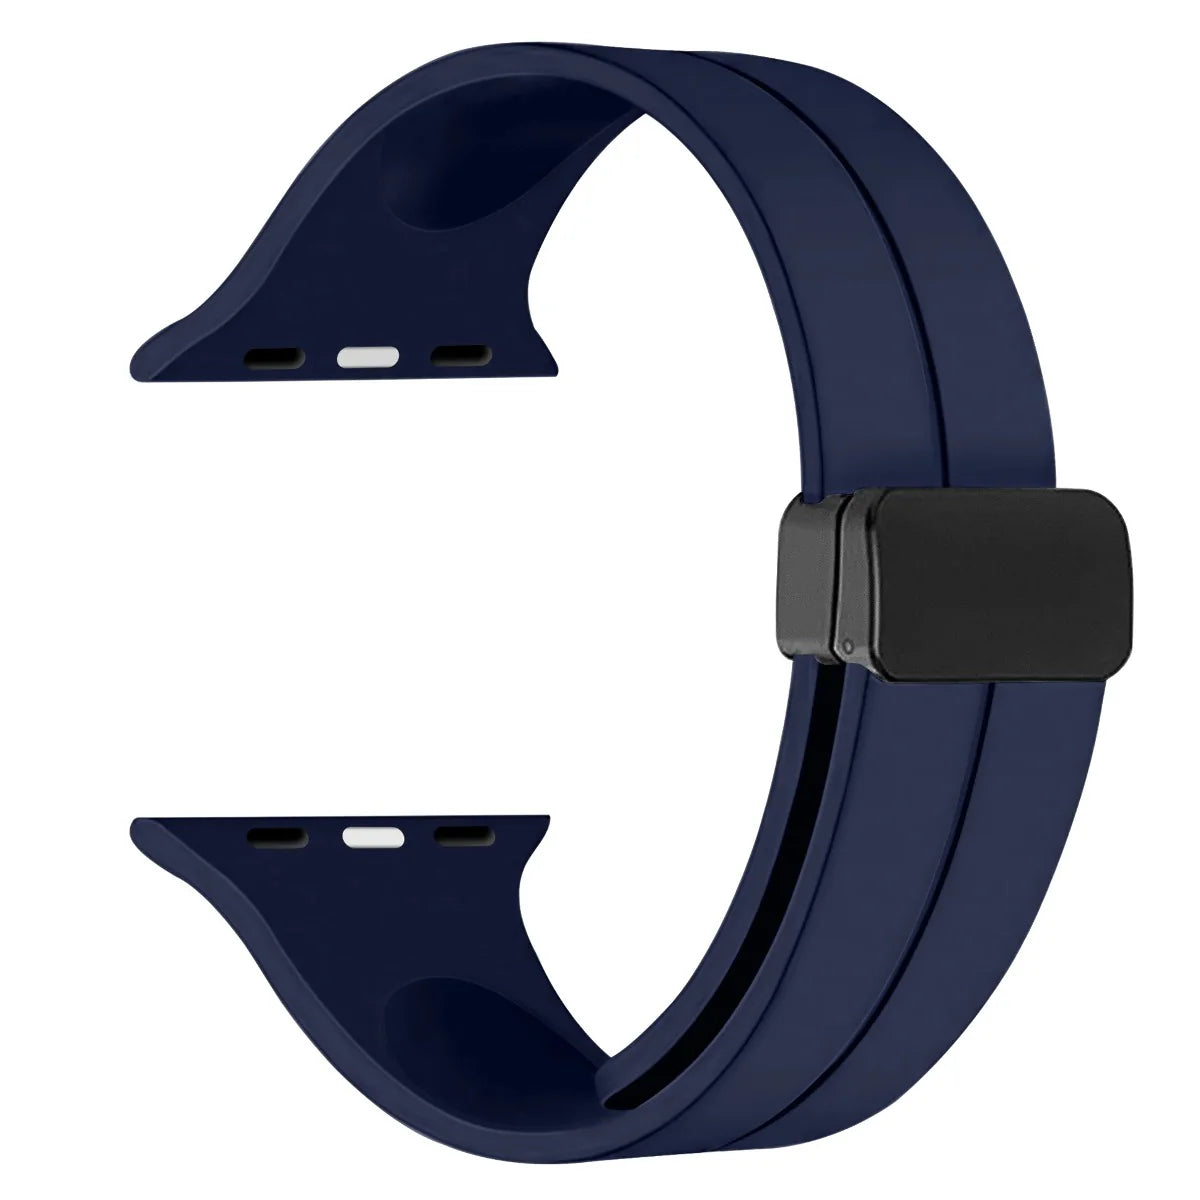 RhinoGuards Magnetic Silicone Band For Apple Watch